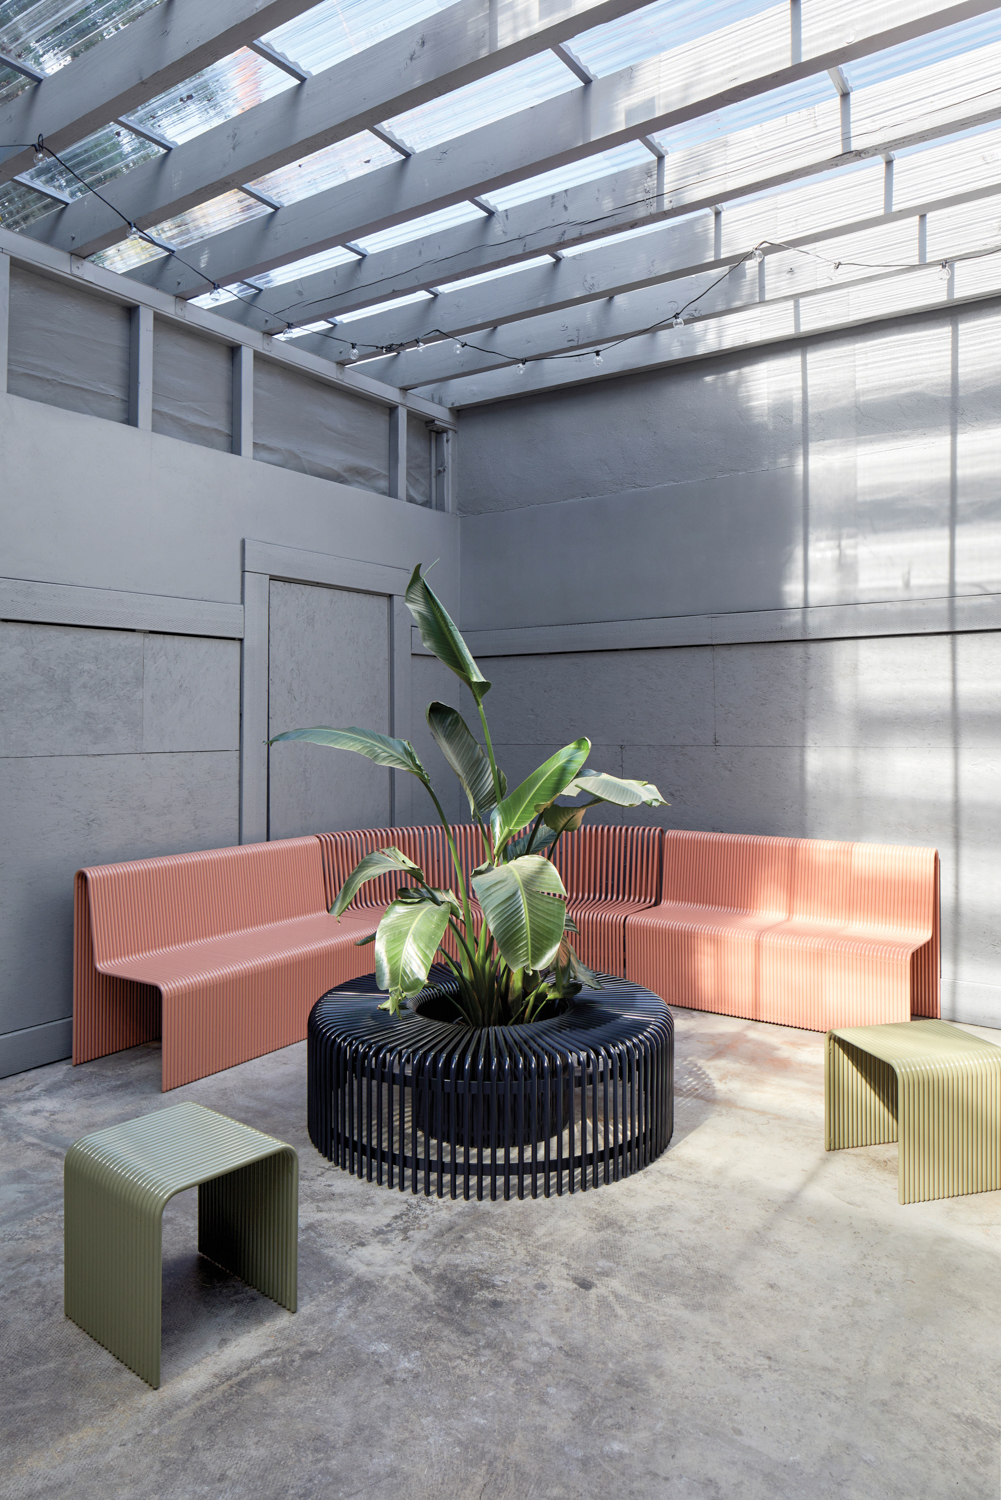 Curved Ribbon outdoor sofa and table by LAUN in a shaded patio with a tall plant in the middle